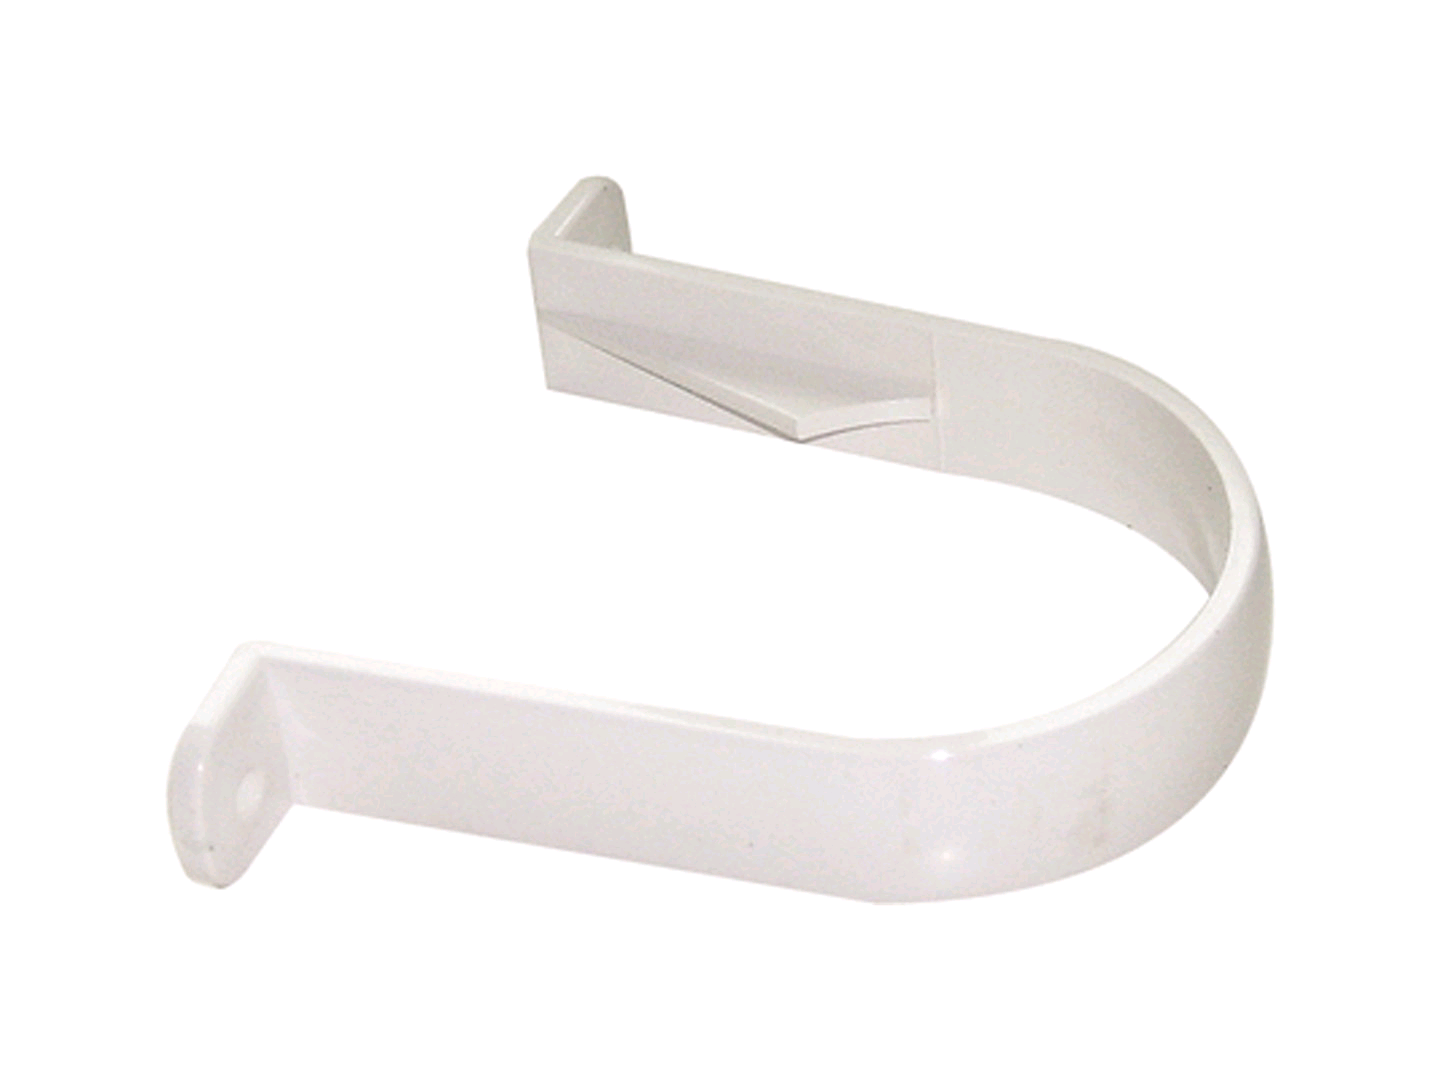 Floplast 68mm Downpipe Round Clips White 